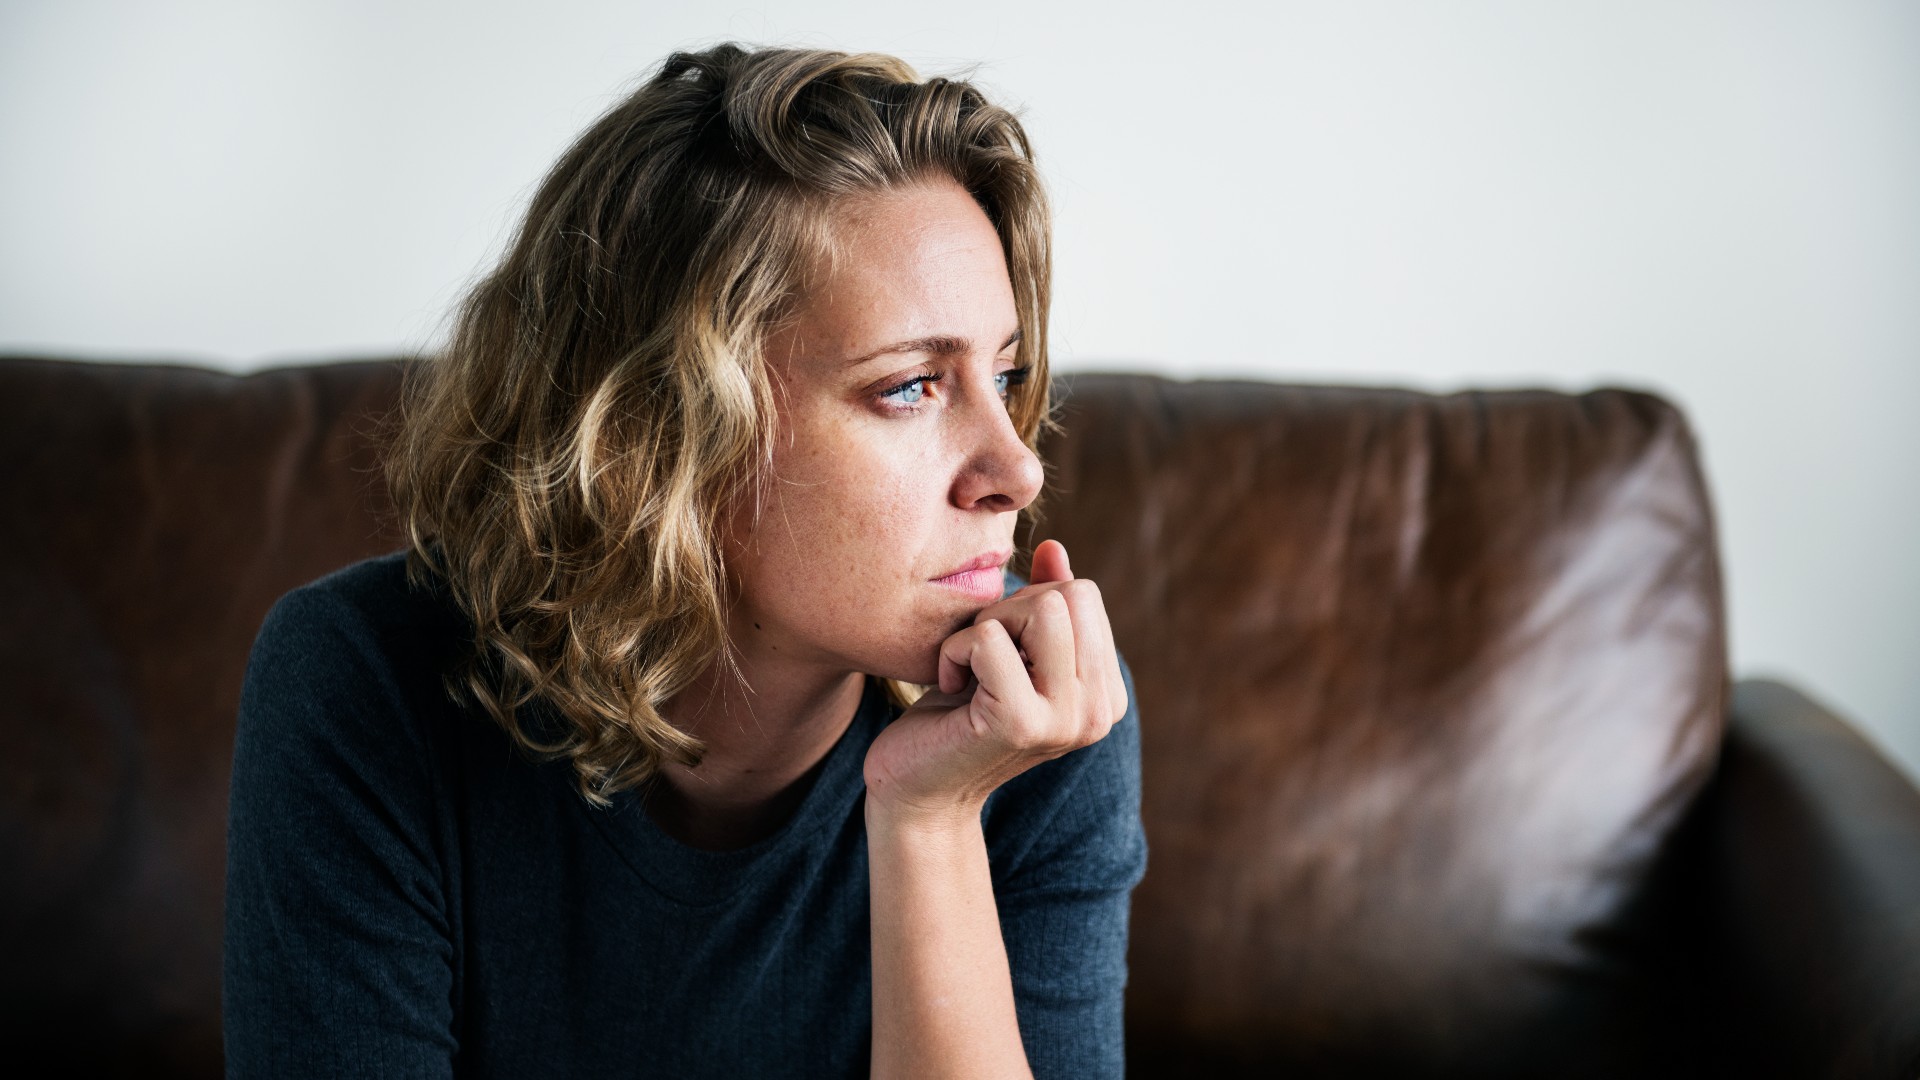 Depressed woman sitting on couch